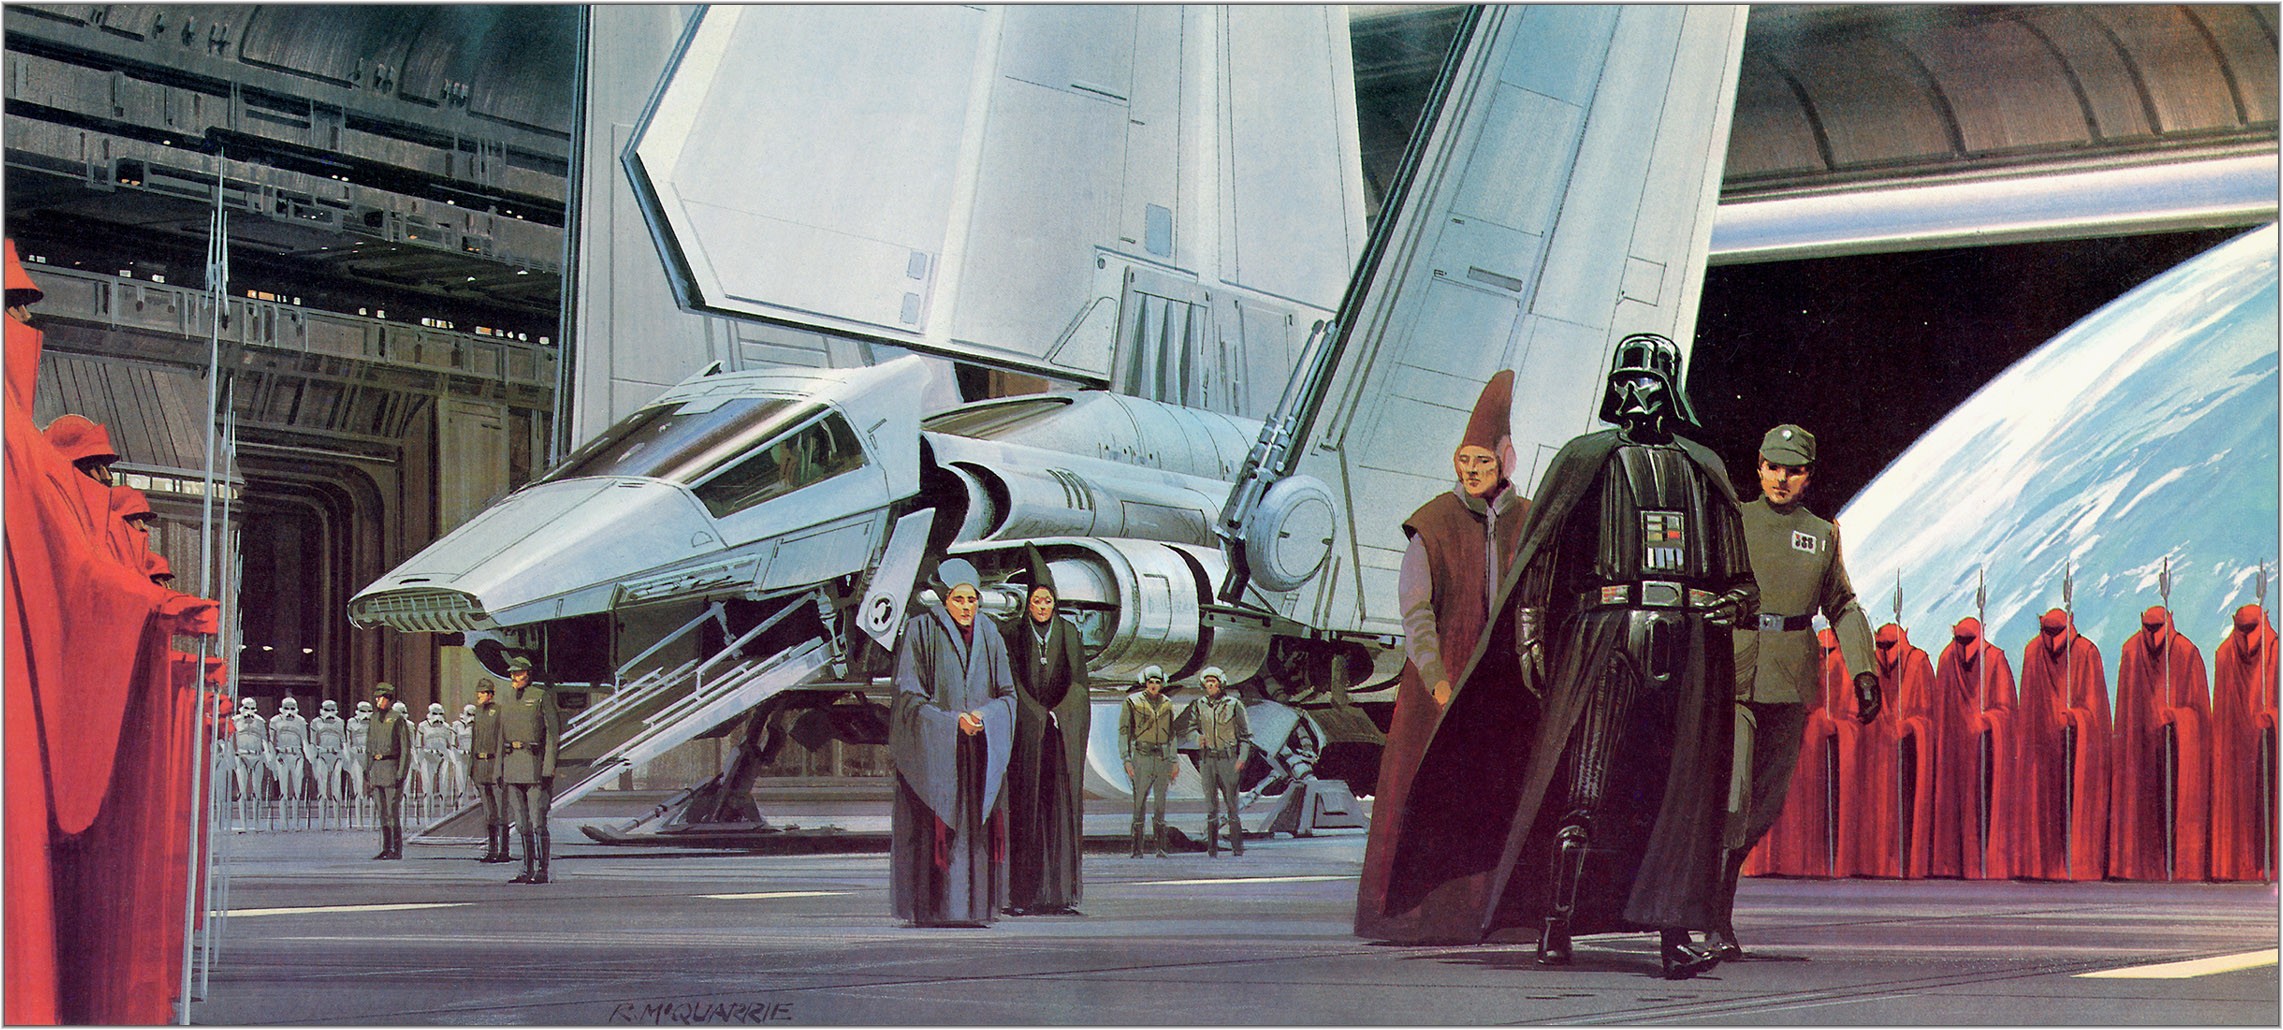 General 2283x1030 Star Wars artwork concept art imperial shuttle Darth Vader Sith science fiction Death Star Ralph McQuarrie movie characters